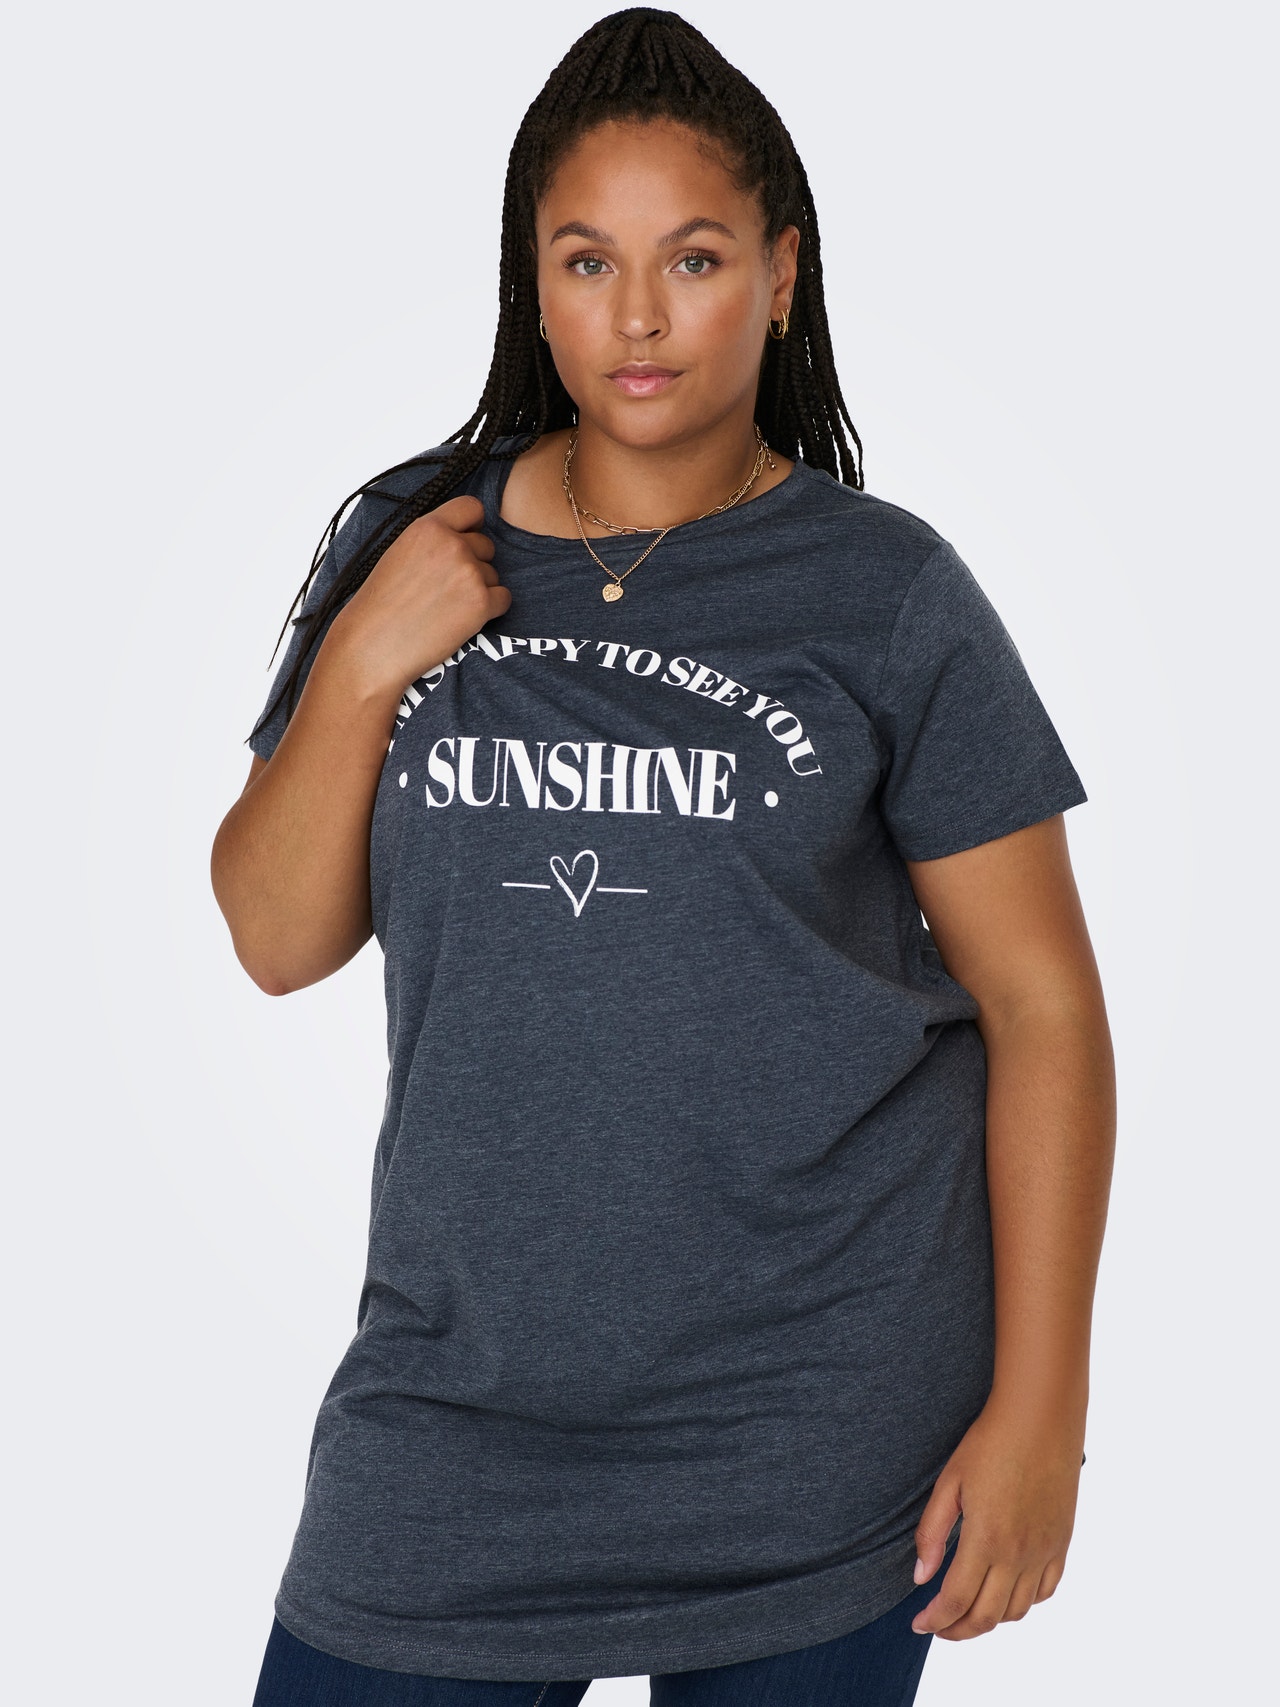 ONLY Curvy Longline T-Shirt -India Ink - 15289125